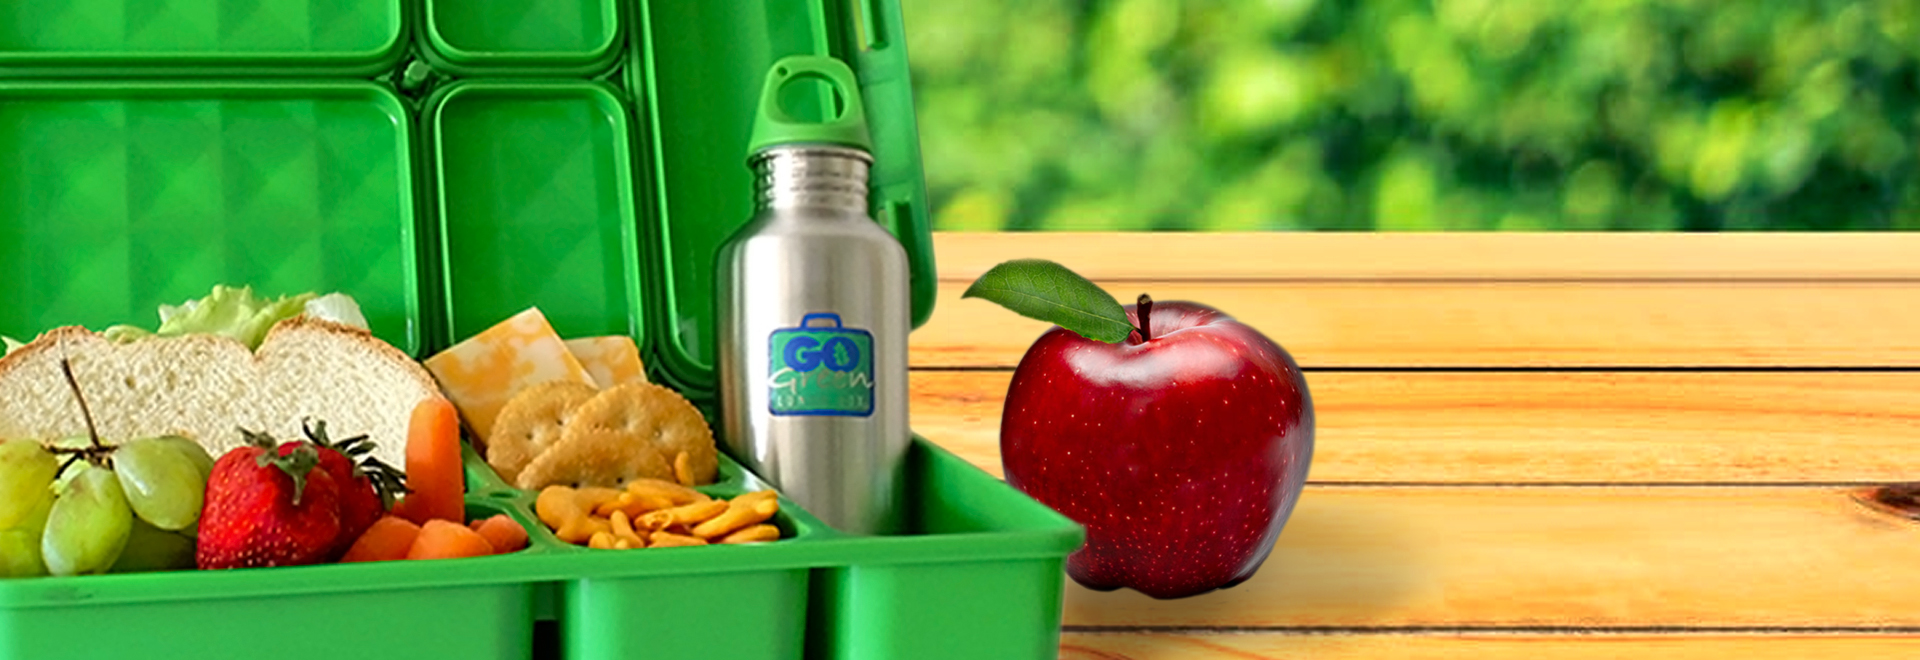 Lunch Containers - Snack Container, Snacks on The Go, Eco-Friendly